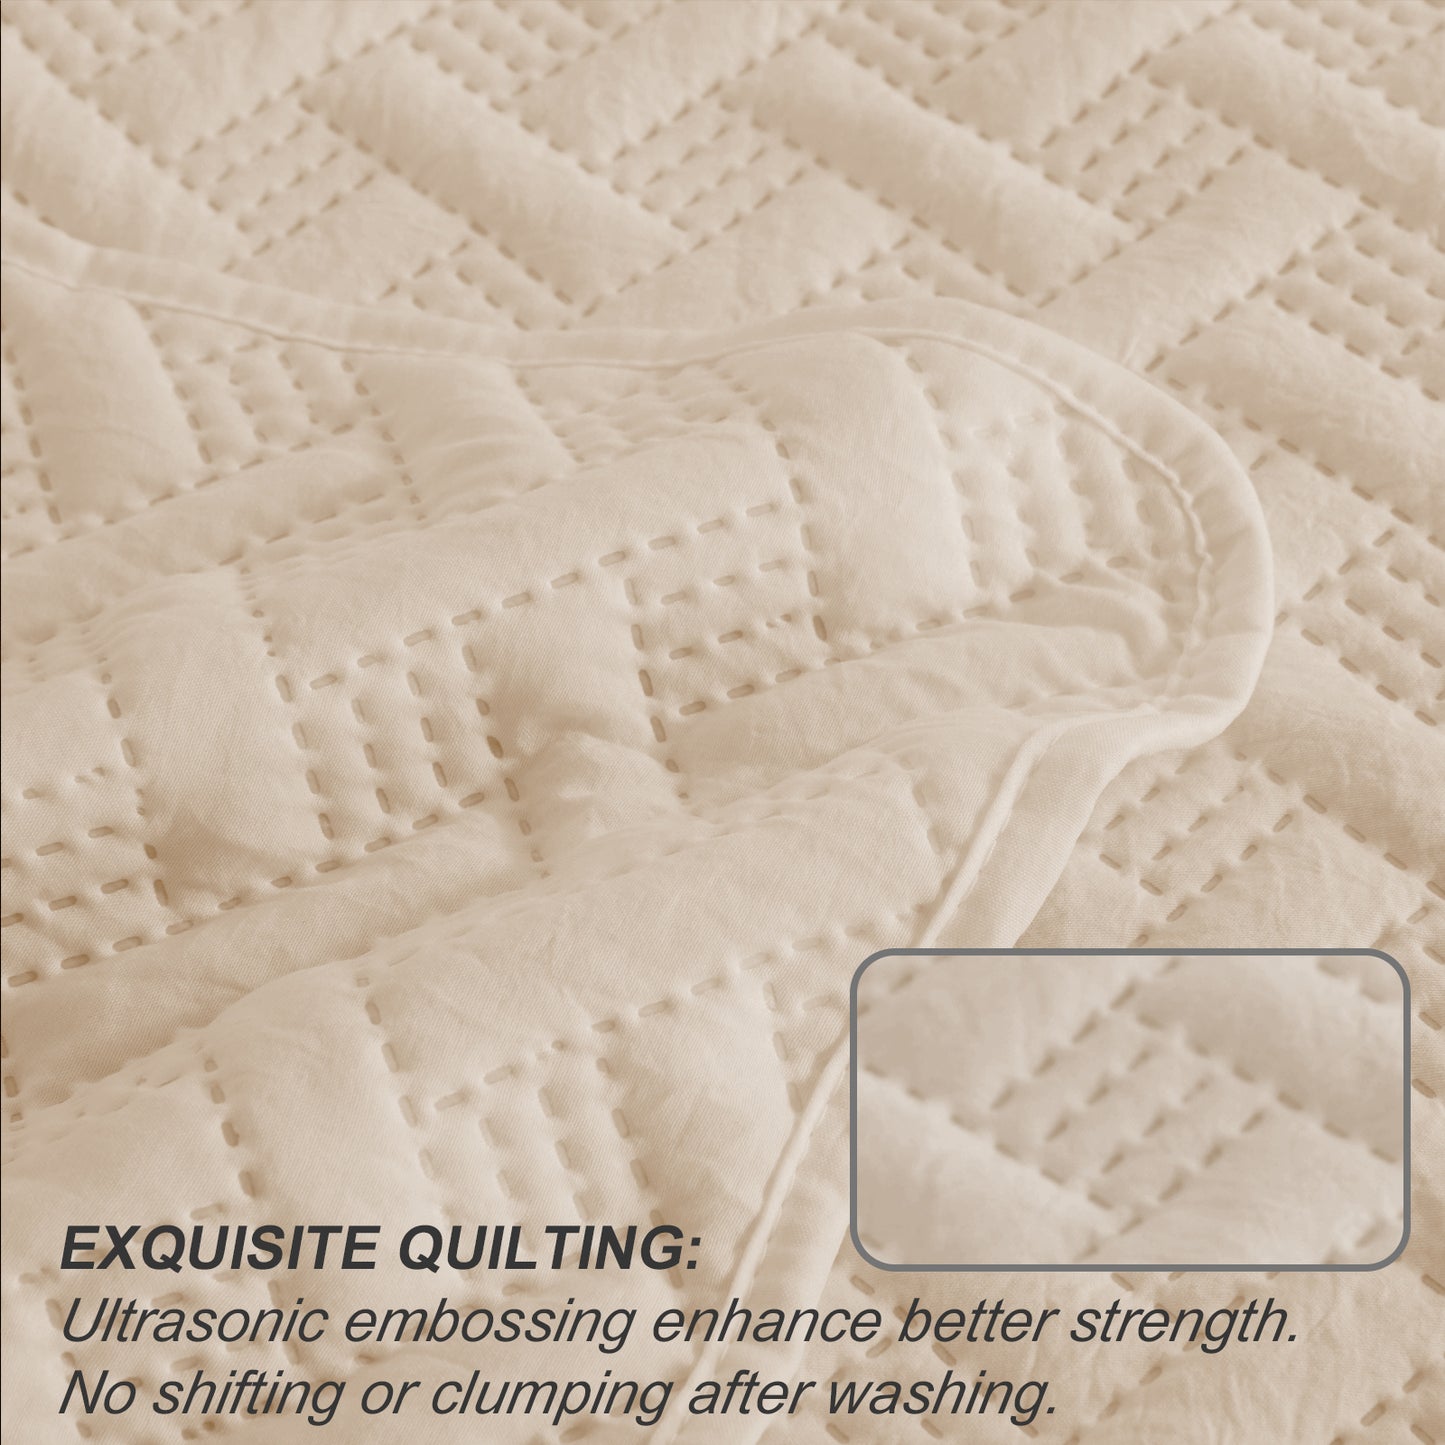 Exclusivo Mezcla 2-Piece Bone Twin Size Quilt Set, Weave Pattern Ultrasonic Lightweight and Soft Quilts/Bedspreads/Coverlets/Bedding Set (1 Quilt, 1 Pillow Sham) for All Seasons